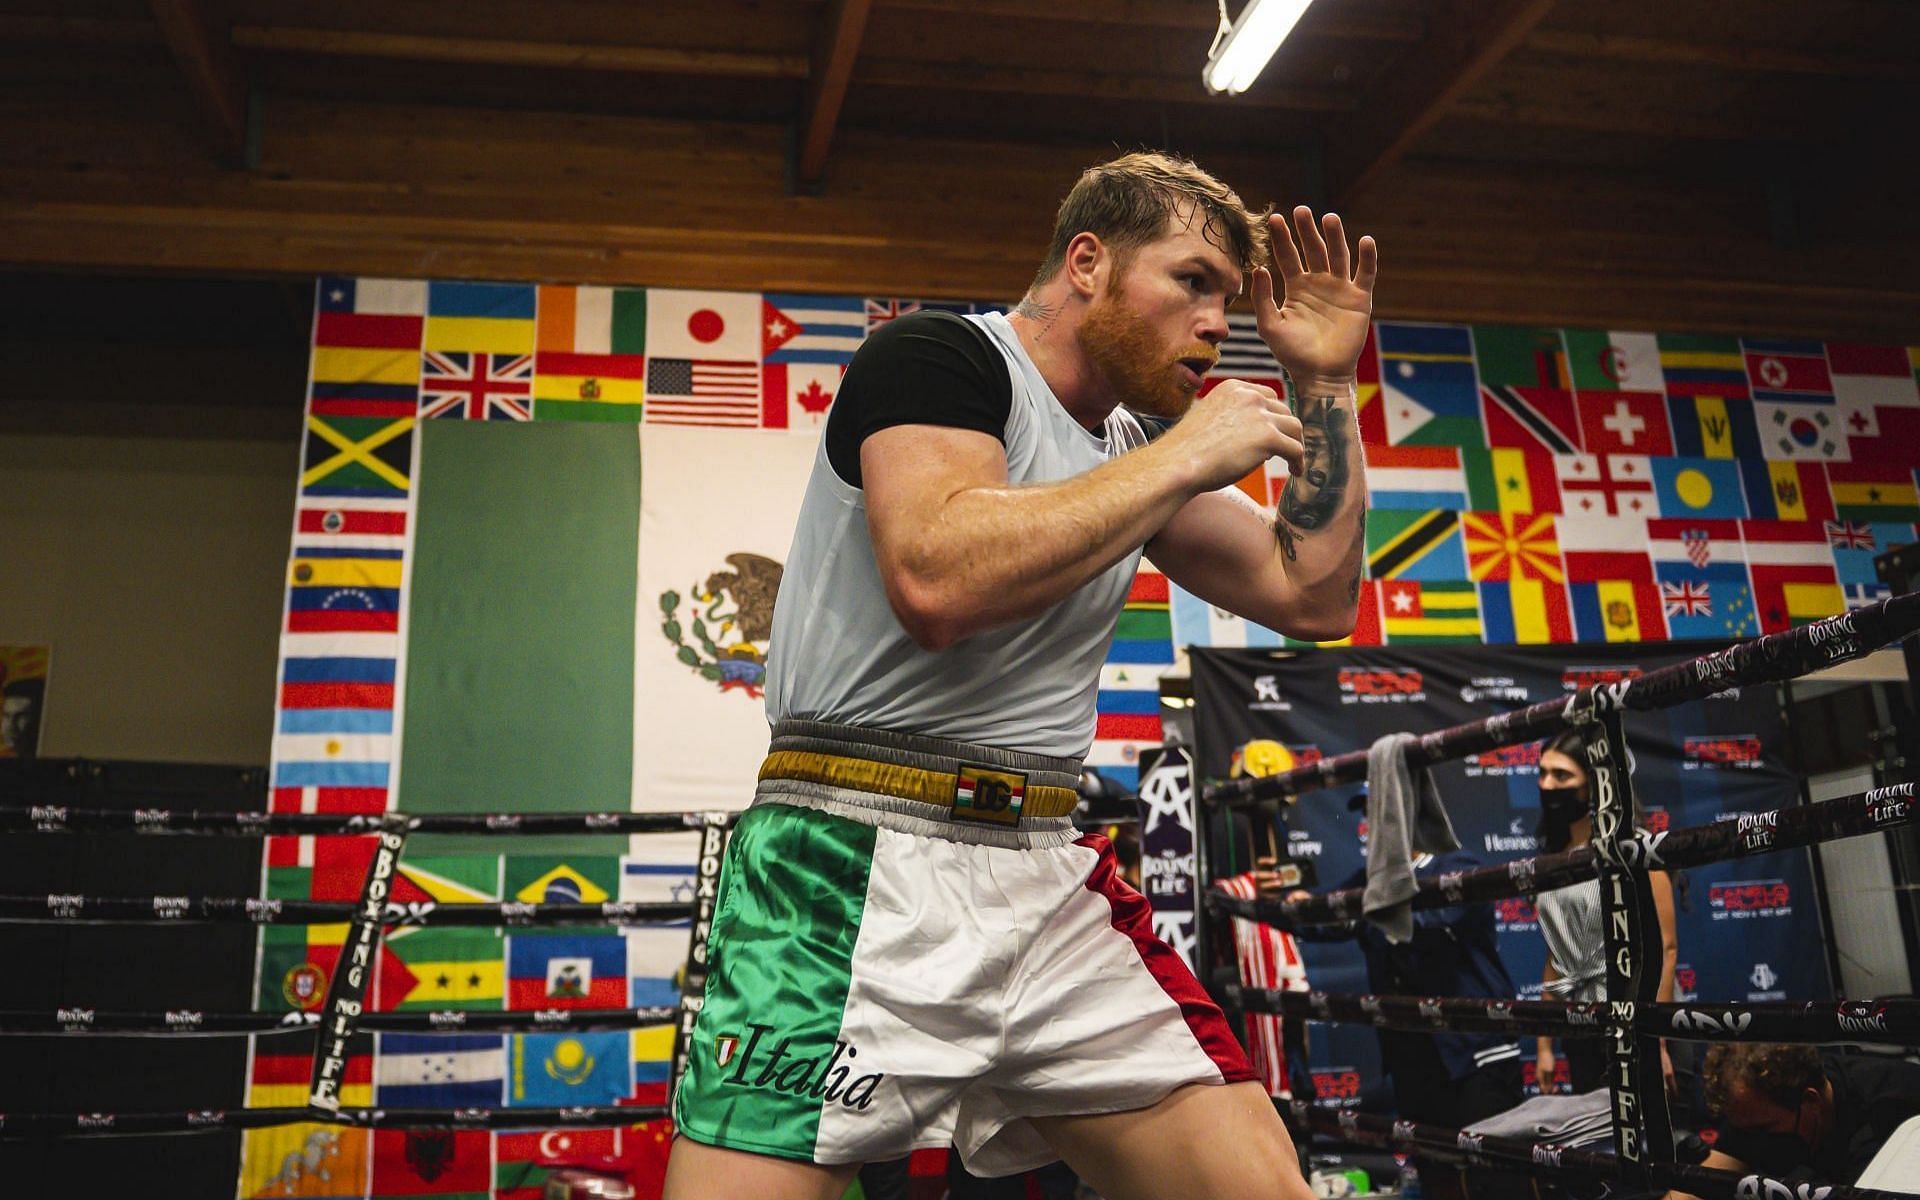 Canelo Alvarez means business as he gears up to take on Caleb Plant in a unification bout next weekend